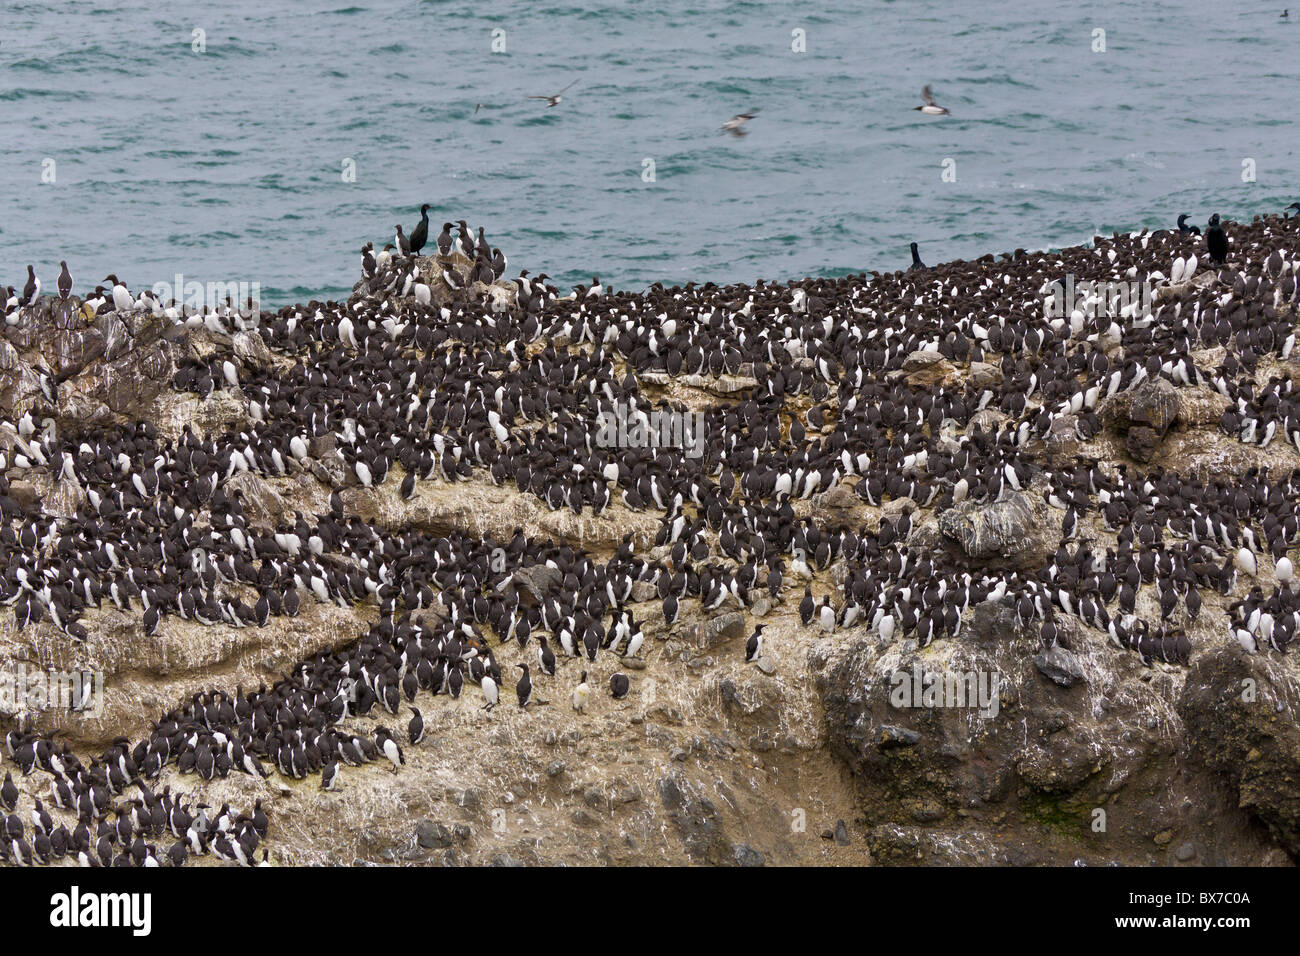 Large colony of Common Murres on the Pacific Ocean coast of Oregon Stock Photo